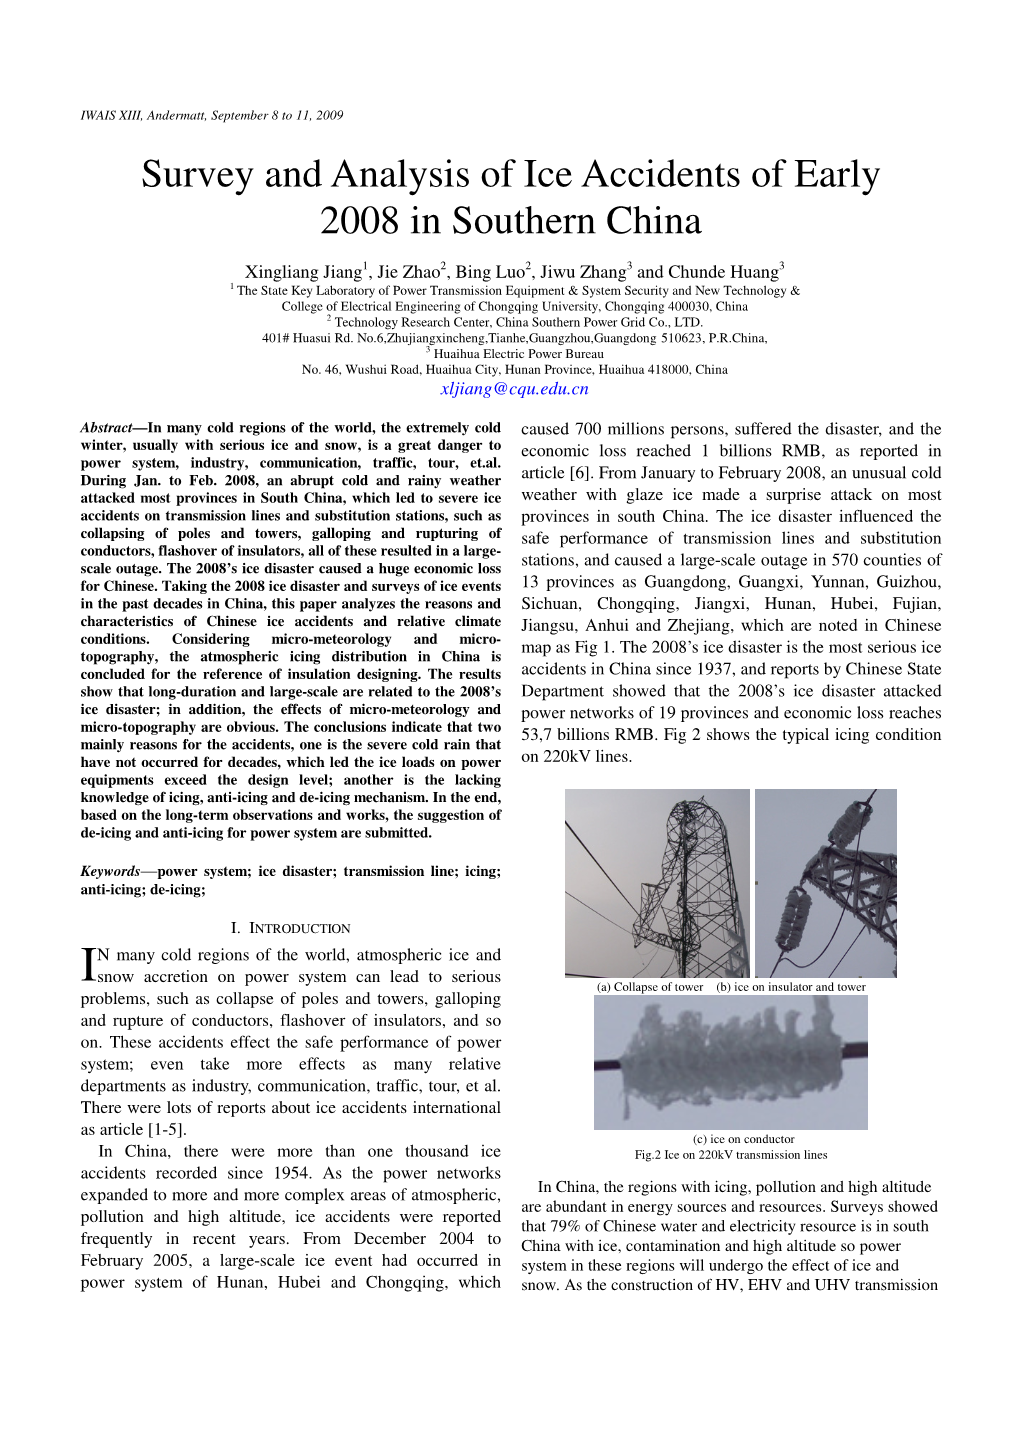 Survey and Analysis of Ice Accidents of Early 2008 in Southern China